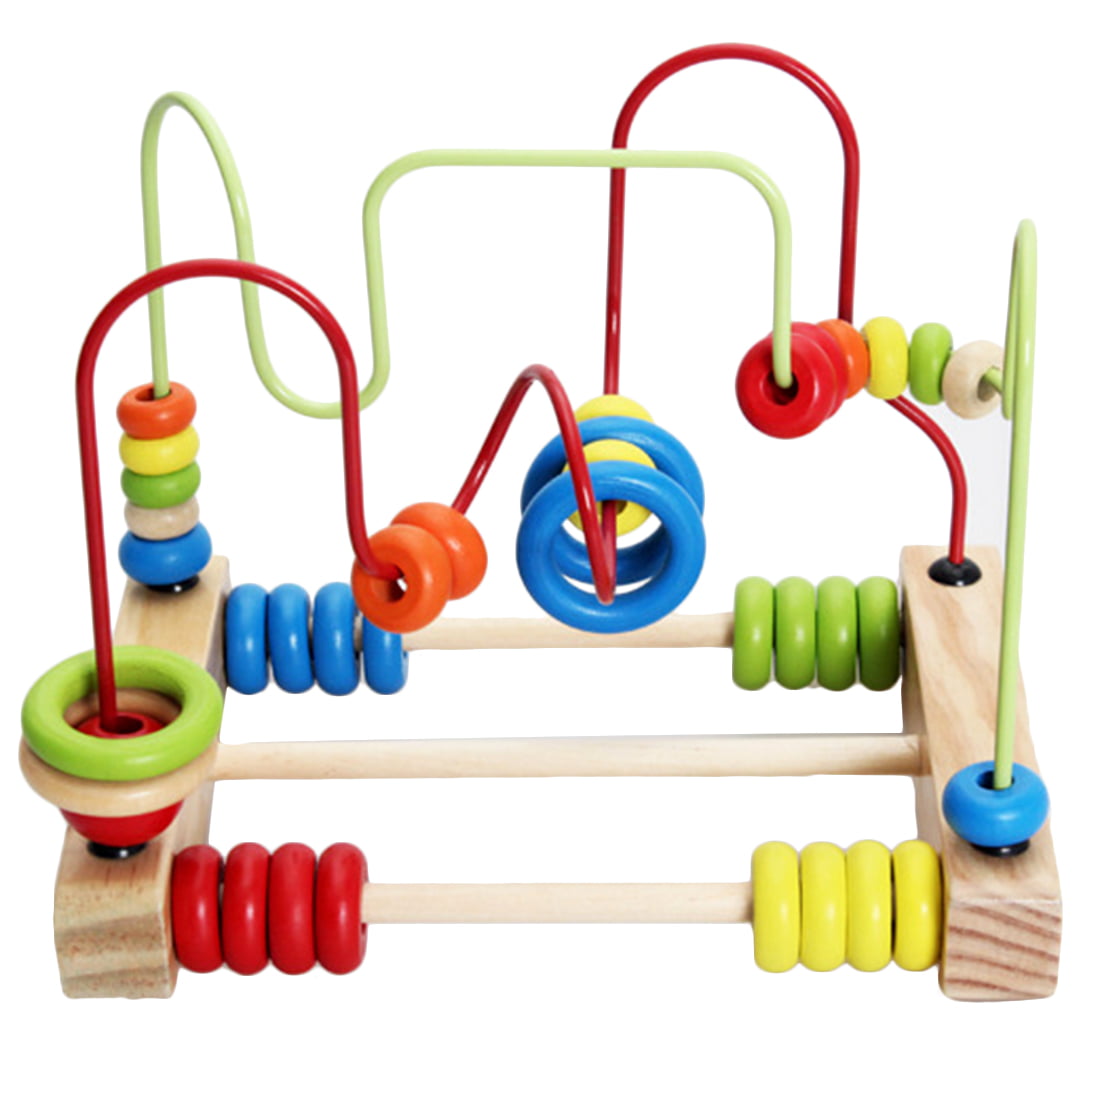 Wooden Bead Abacus Wire Maze Early Learning Educational Toy For Baby Children LA 